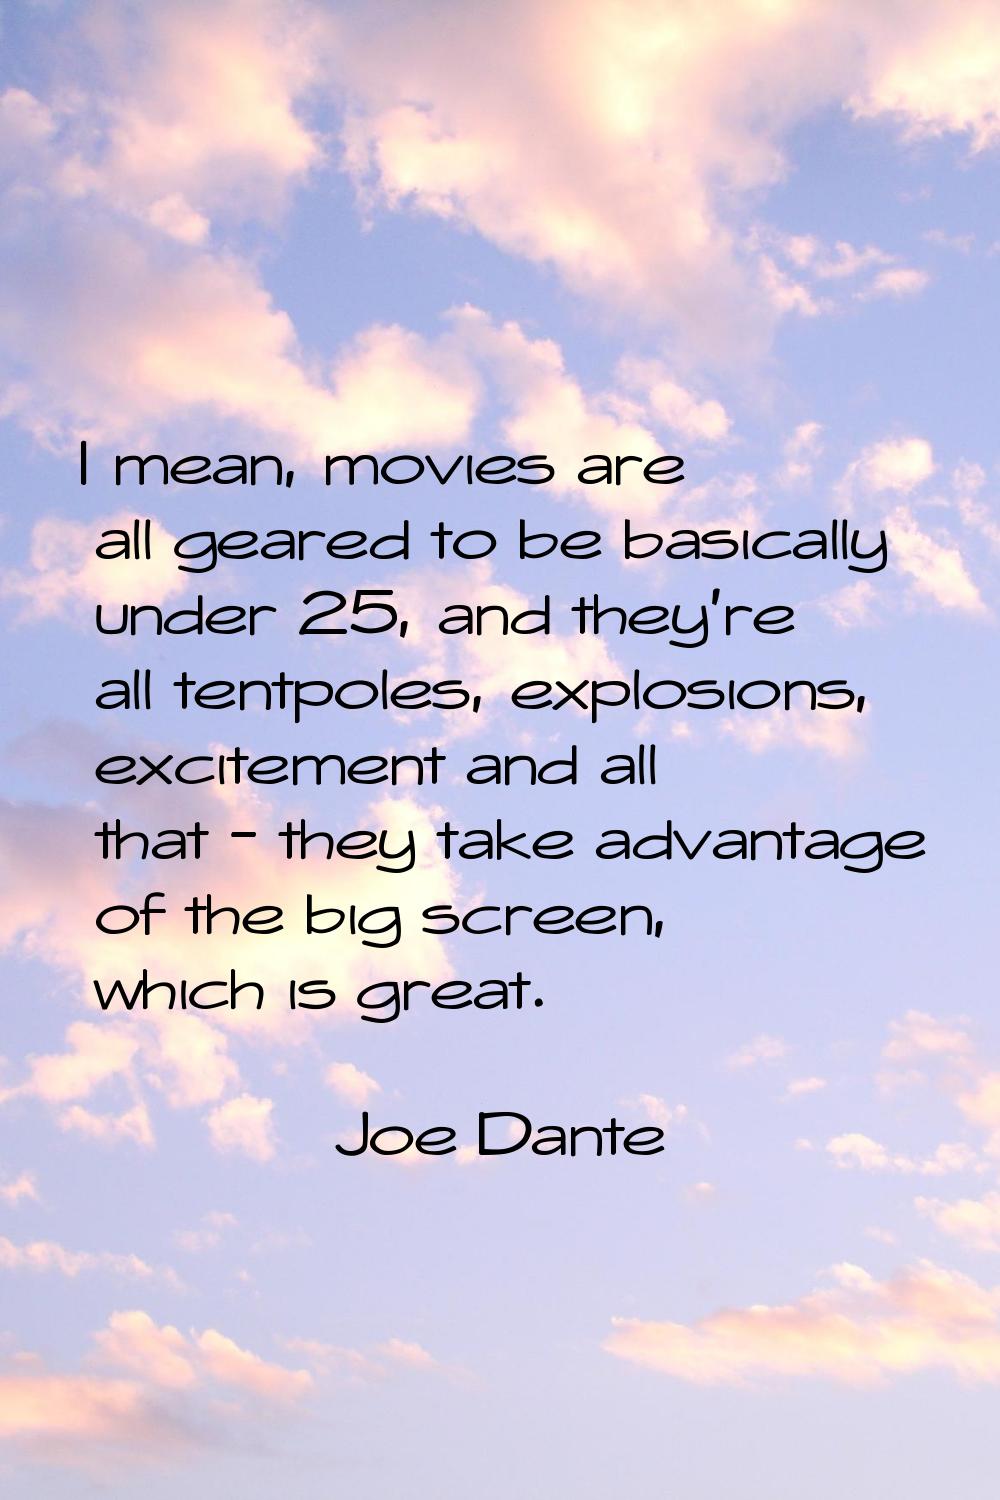 I mean, movies are all geared to be basically under 25, and they're all tentpoles, explosions, exci